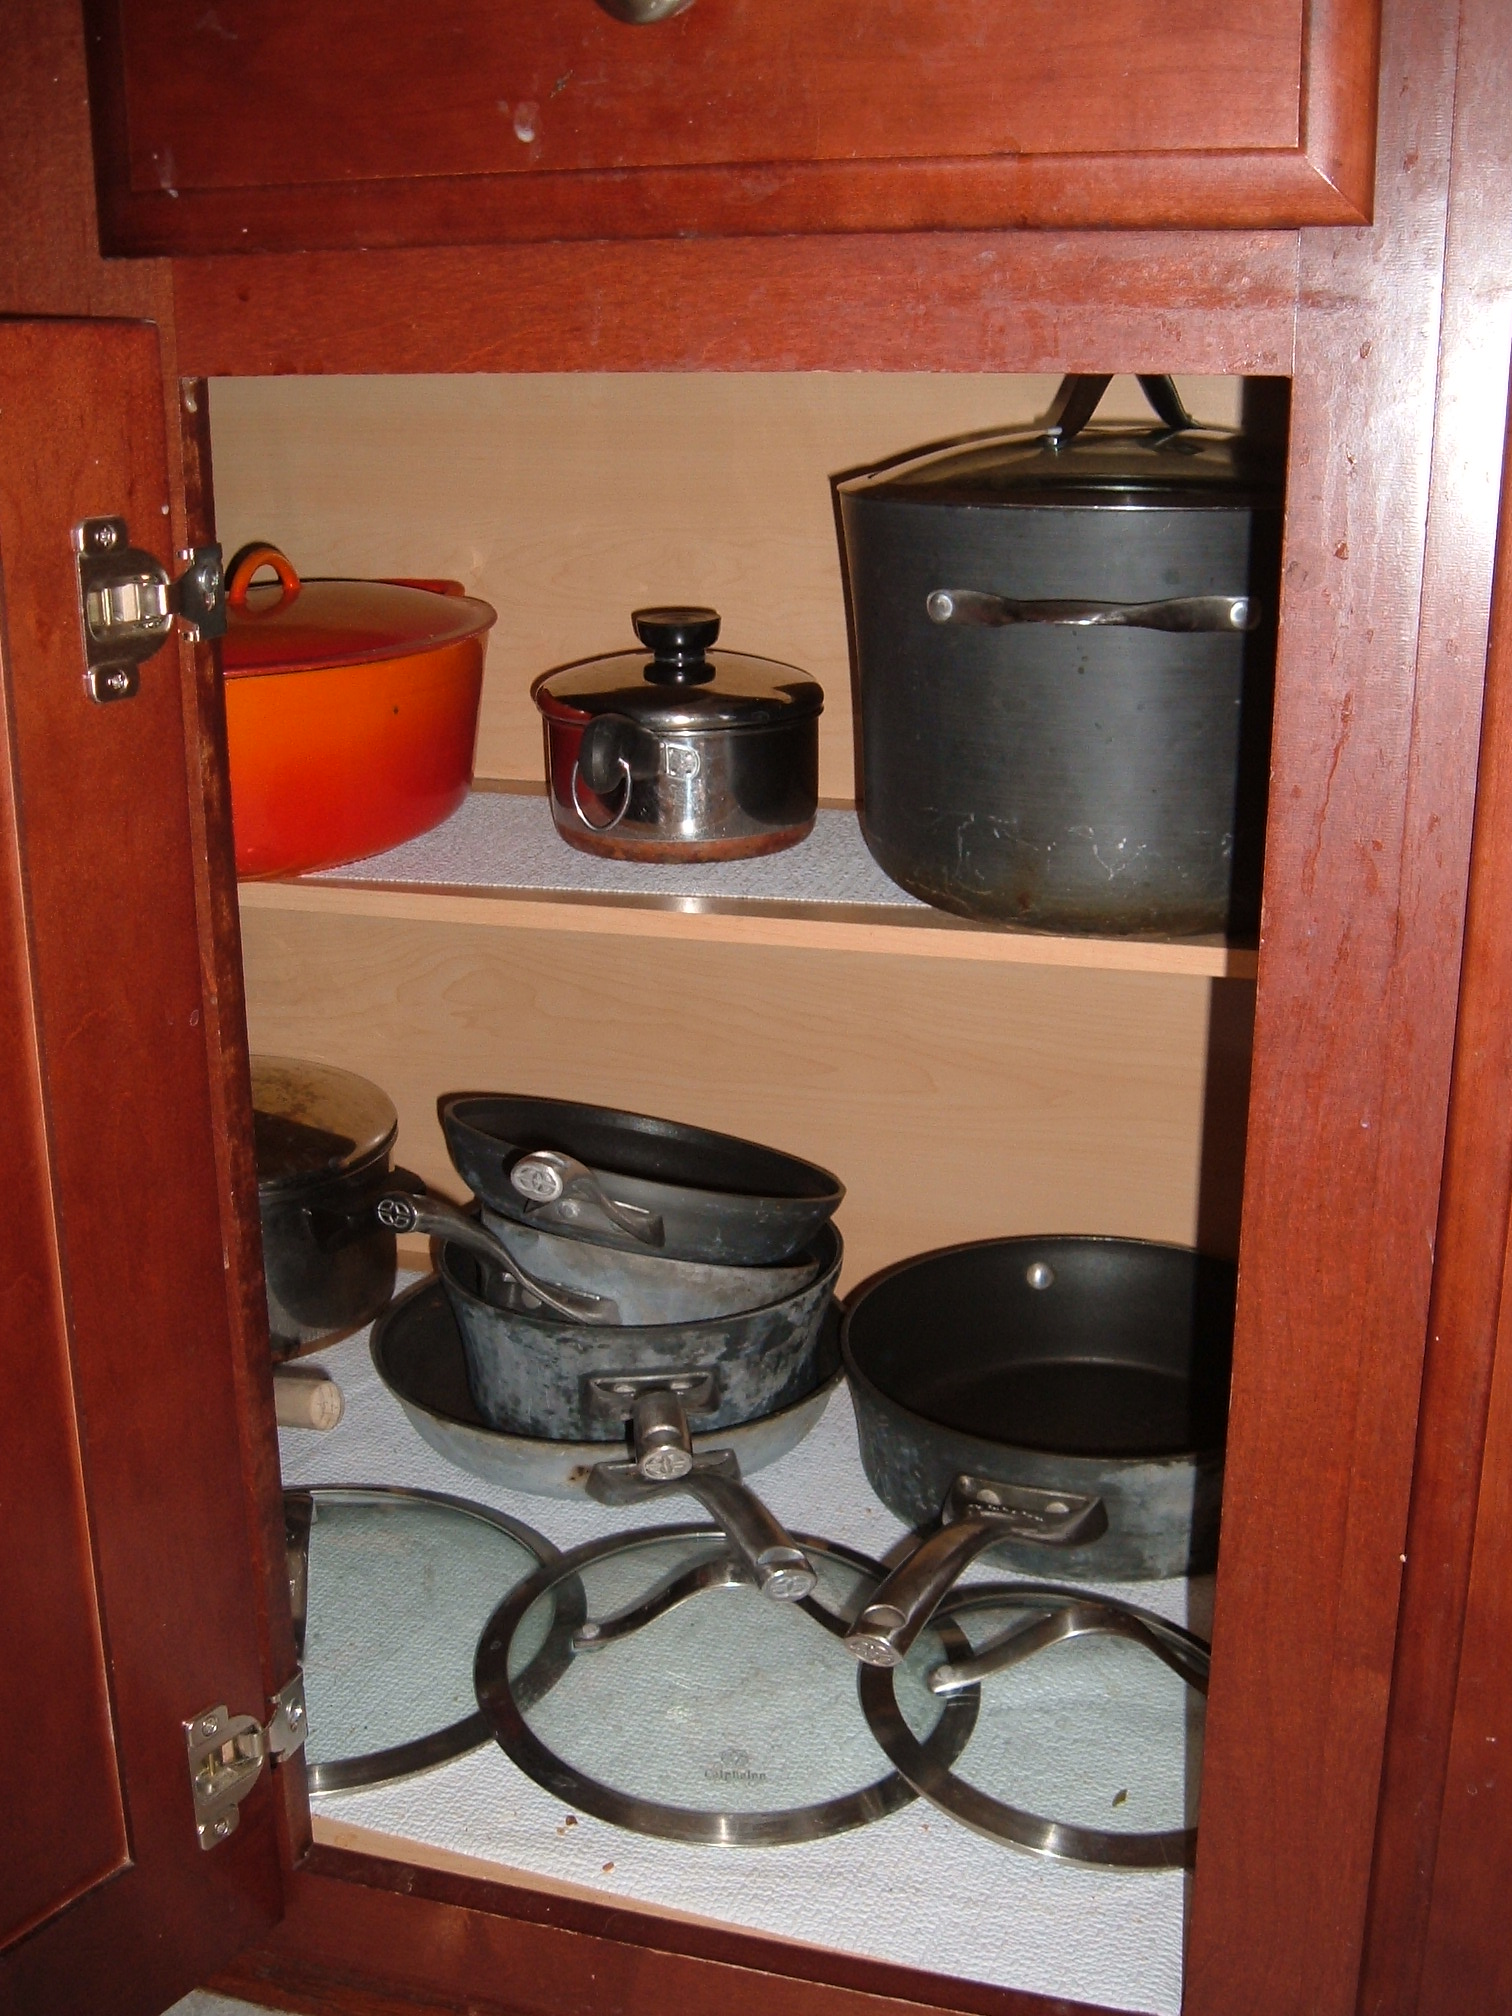 a view from behind some pans on the shelf in the kitchen